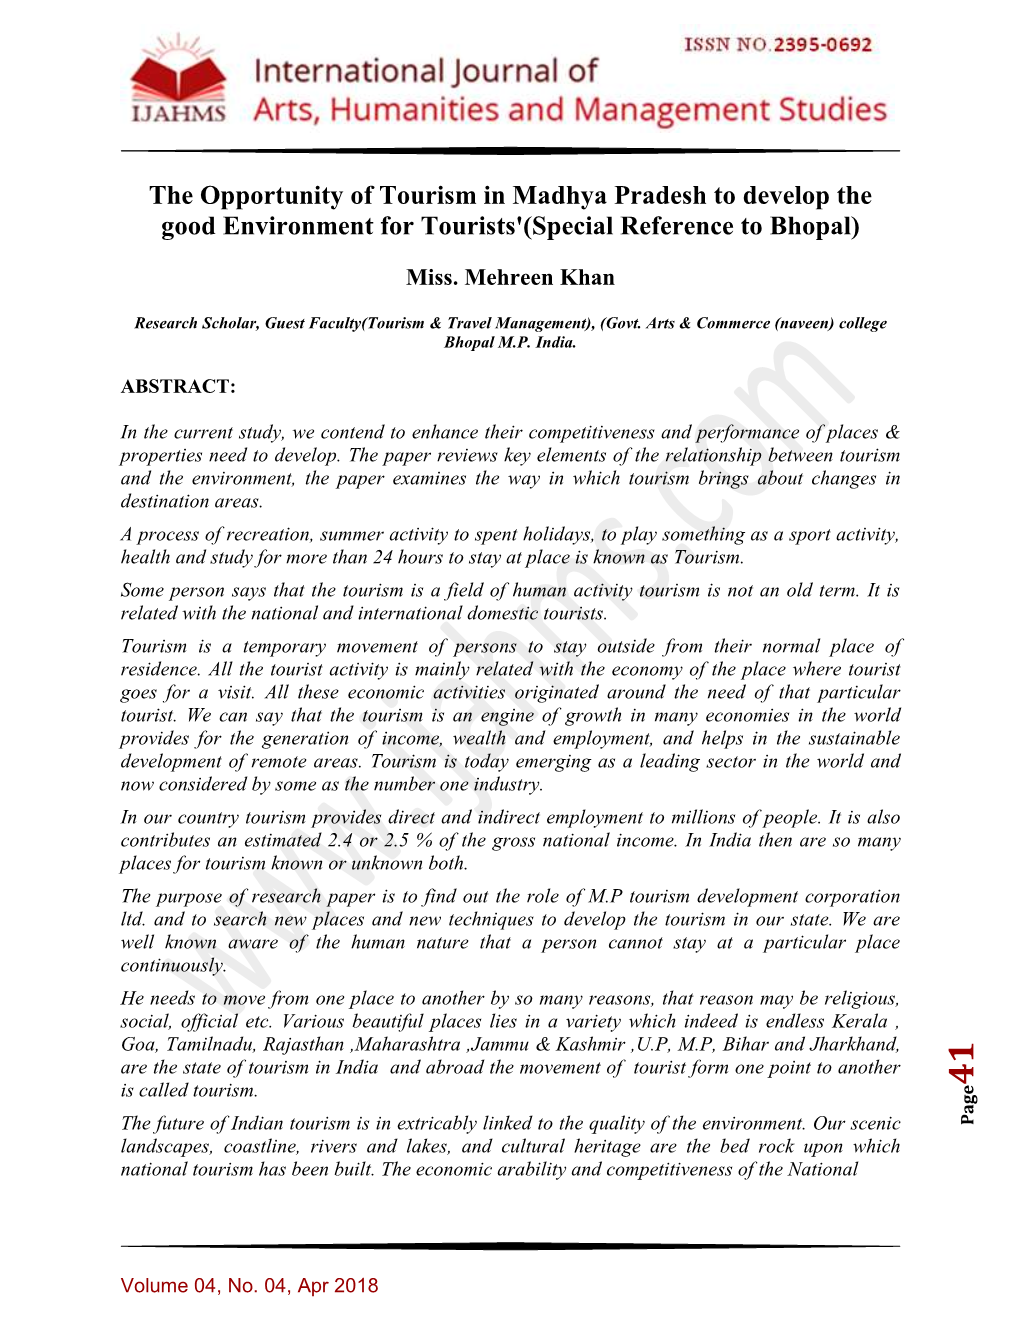 The Opportunity of Tourism in Madhya Pradesh to Develop the Good Environment for Tourists'(Special Reference to Bhopal)